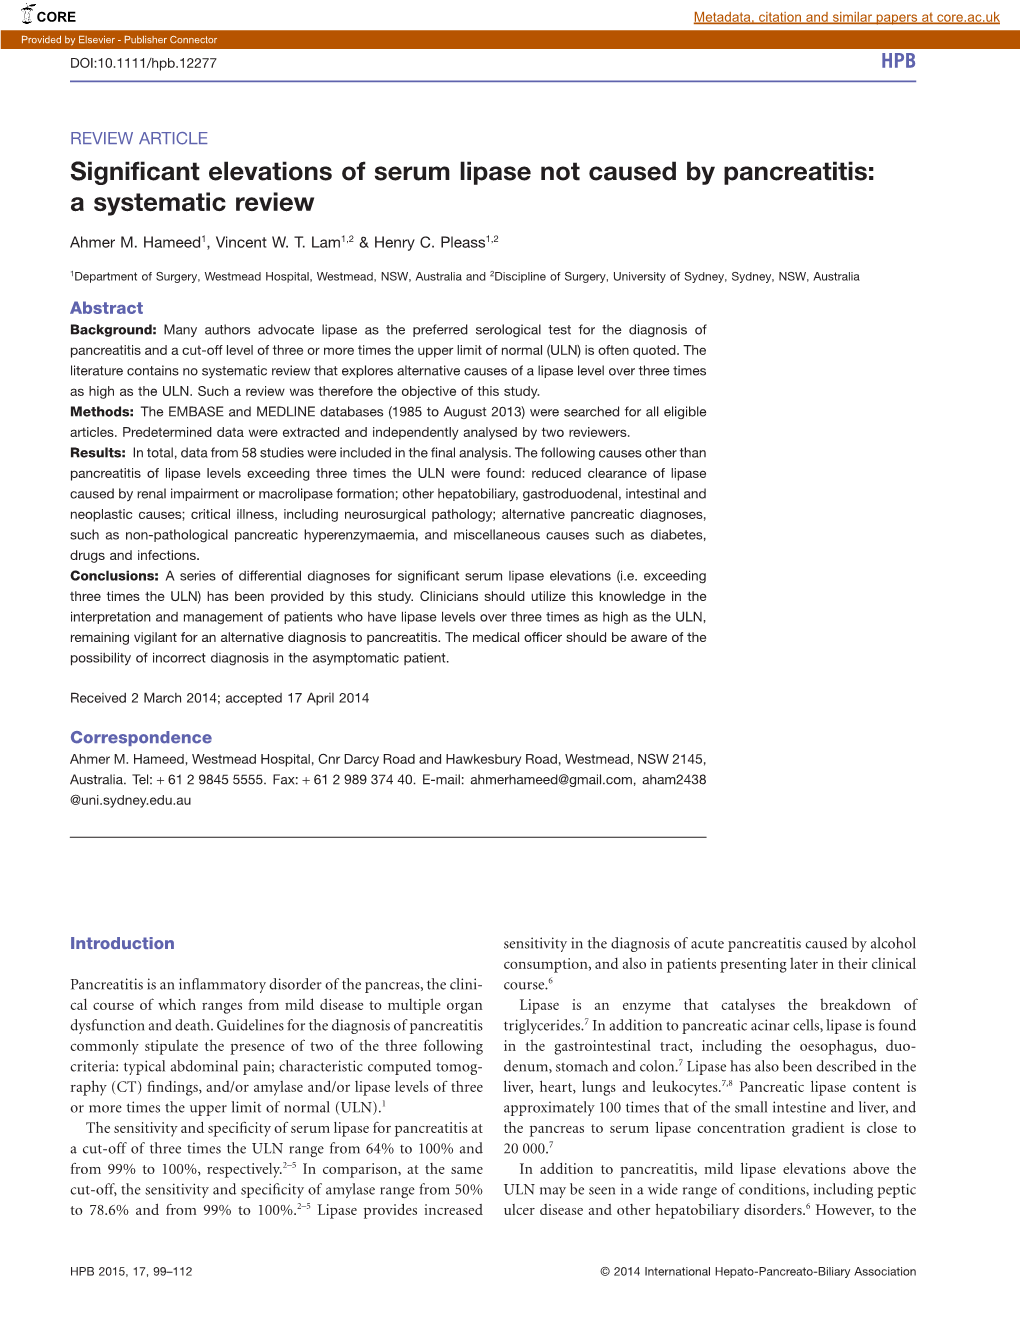 Significant Elevations of Serum Lipase Not Caused by Pancreatitis: a Systematic Review